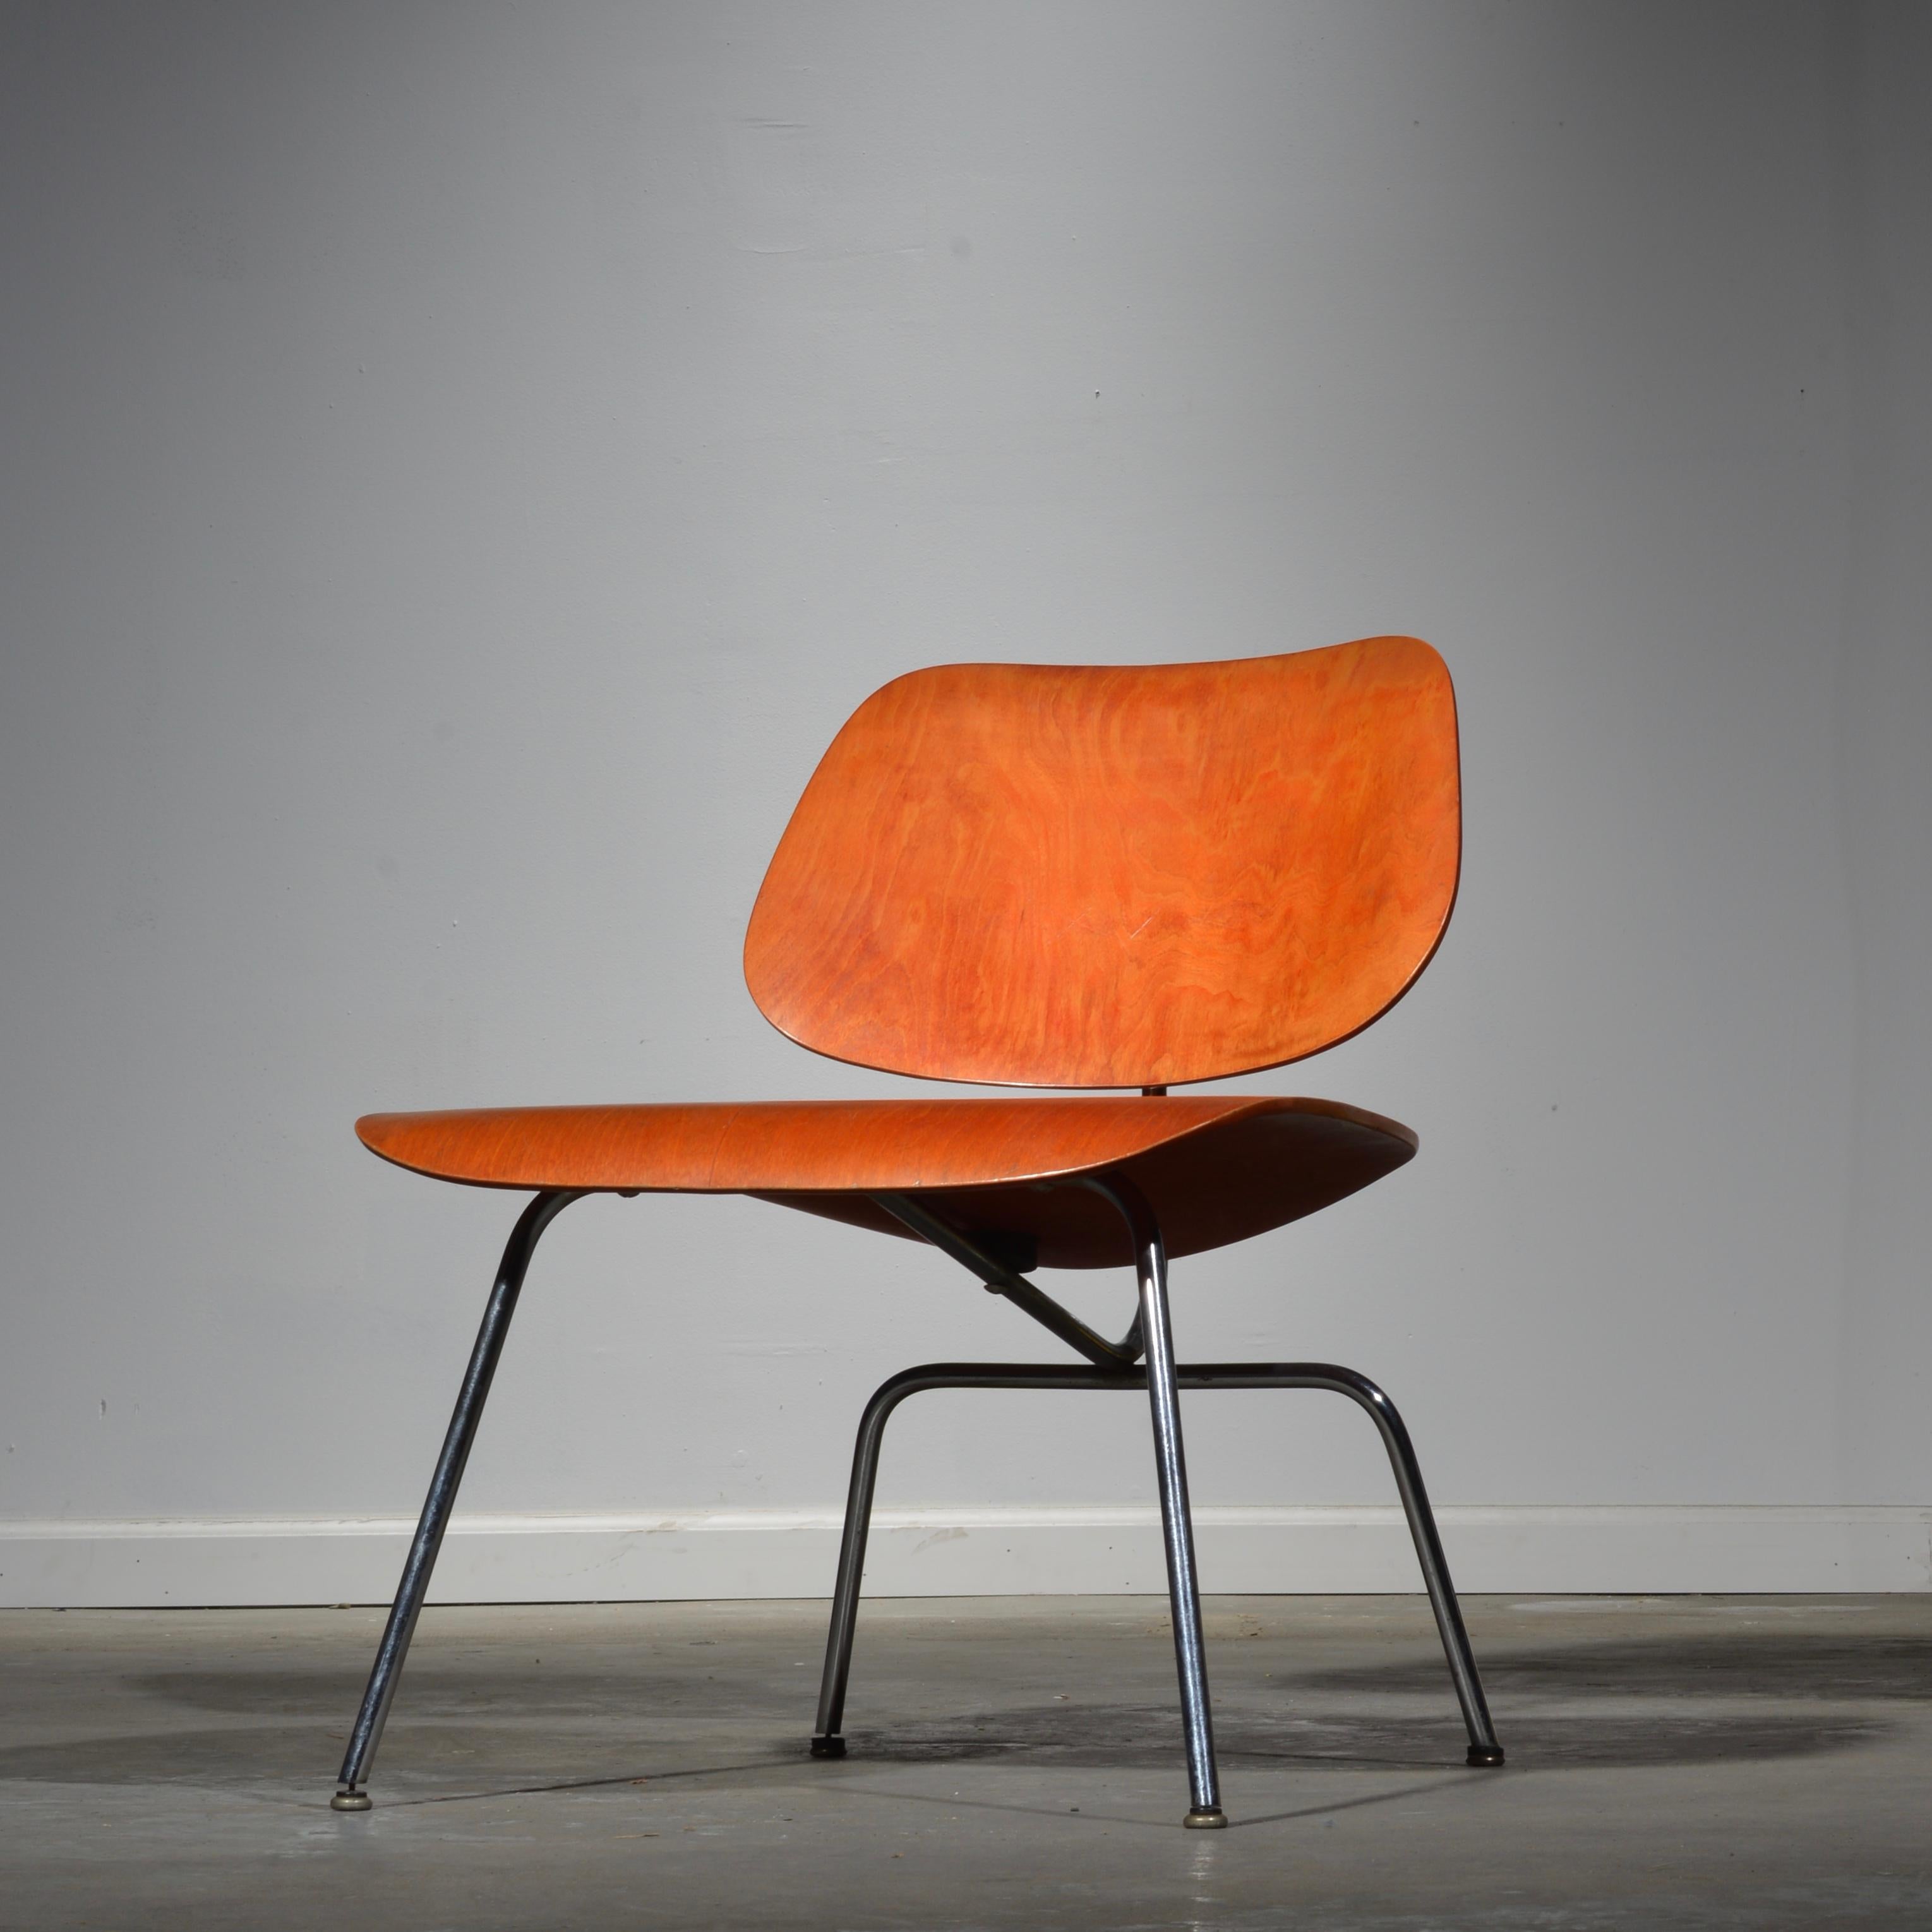 Mid-20th Century First Edition Evans Red Analine Lcm Chair by Charles and Ray Eames